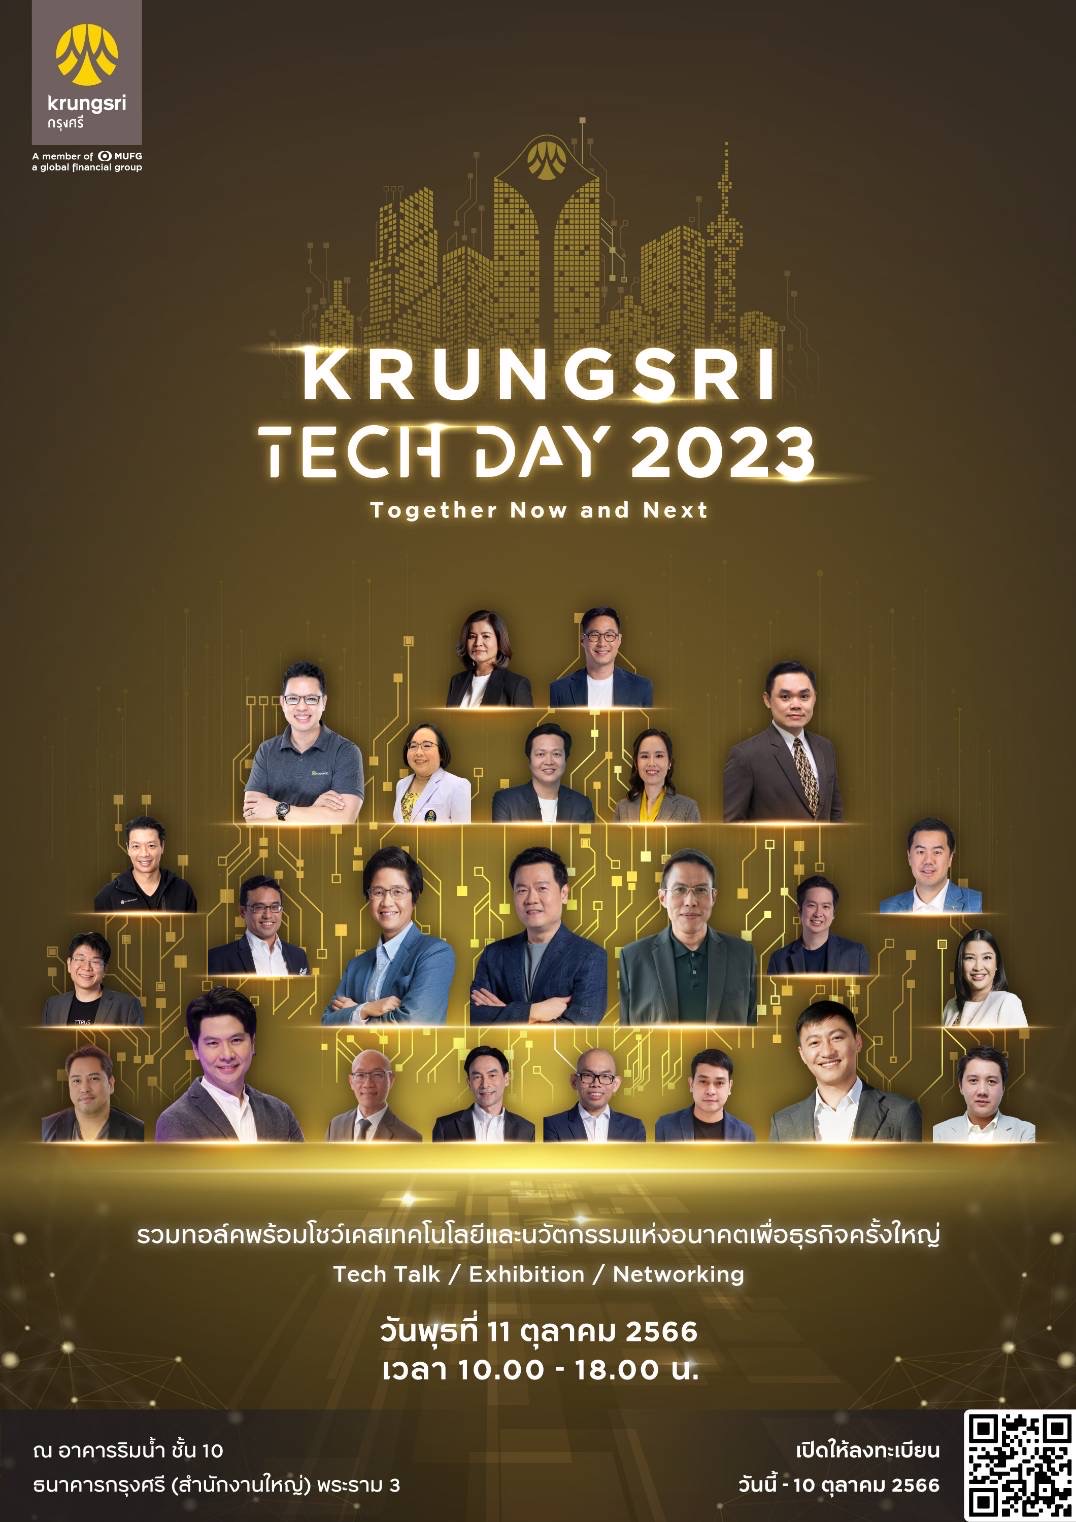 Krungsri Tech Day 2023: Together Now and Next The Collaborations between Krungsri and Tech Partners for Future Technology and